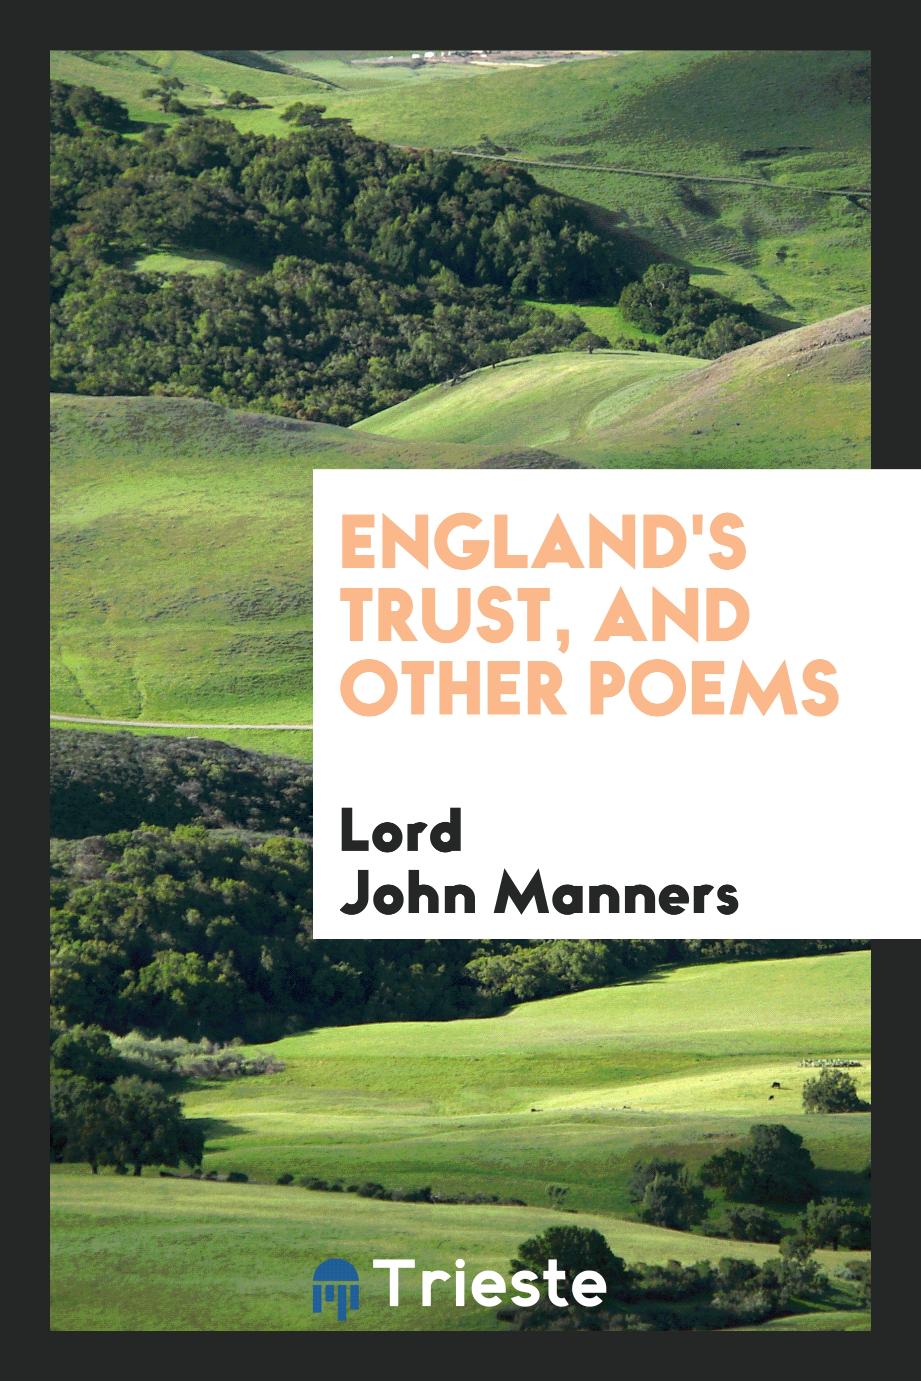 England's trust, and other poems